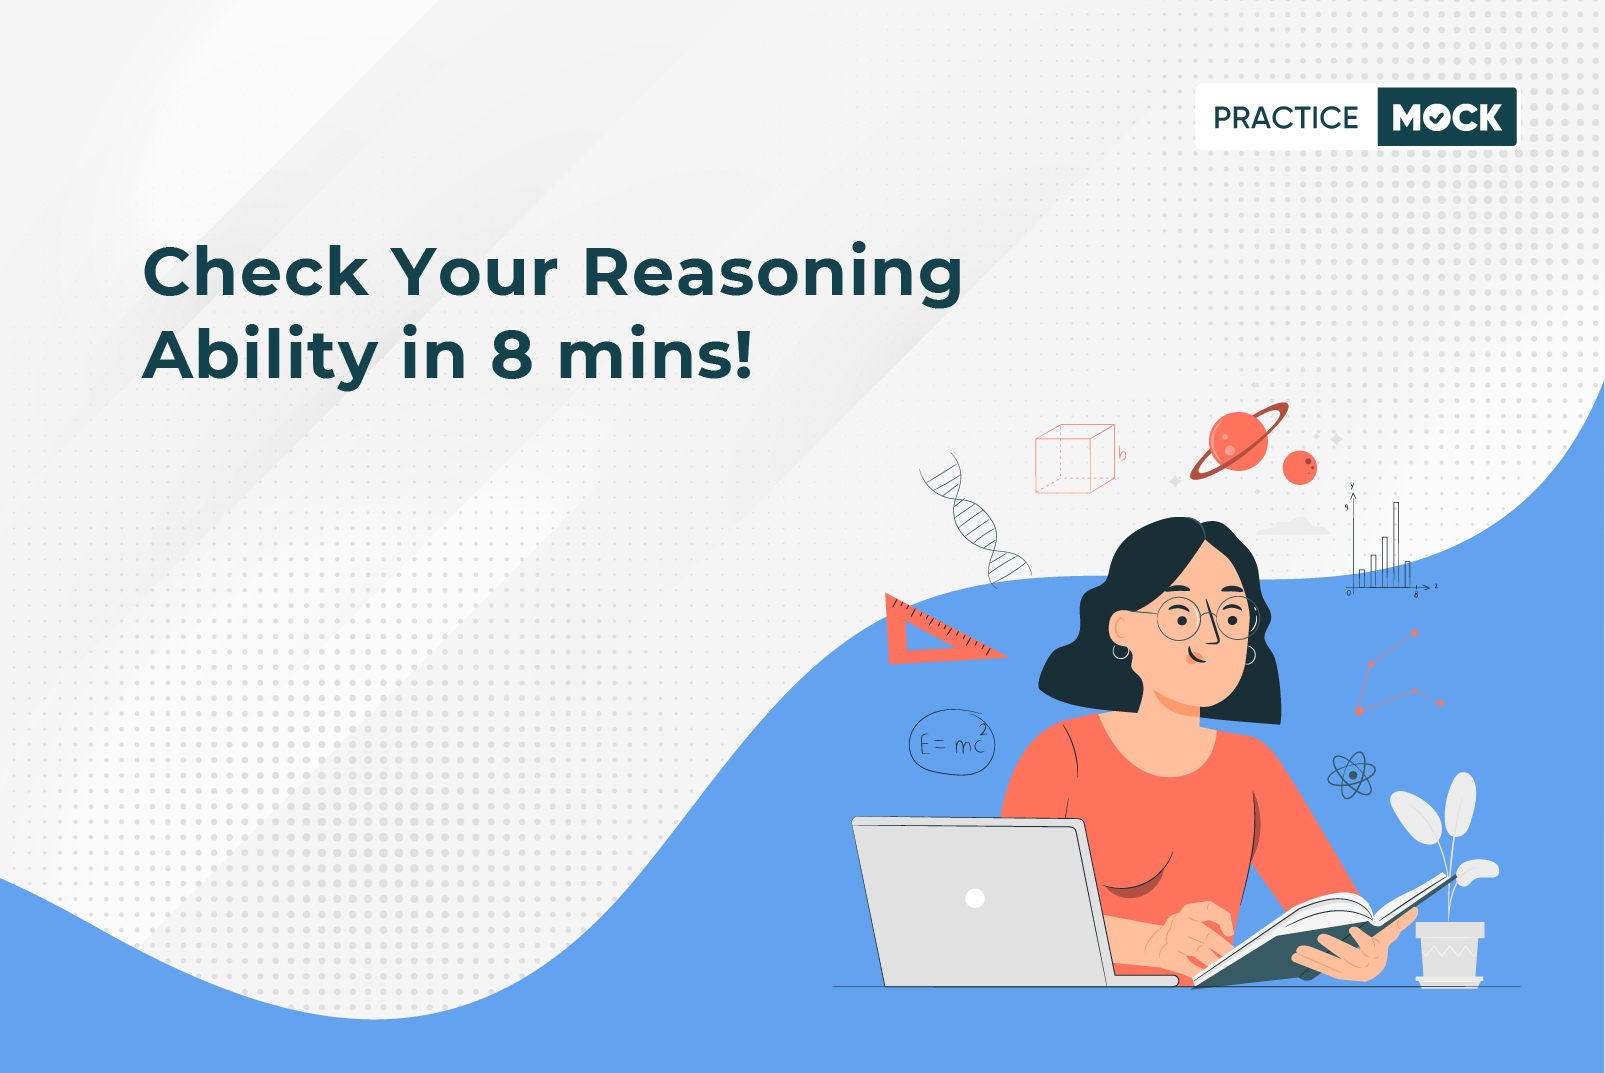 Check Your Reasoning Ability in 8 minutes!